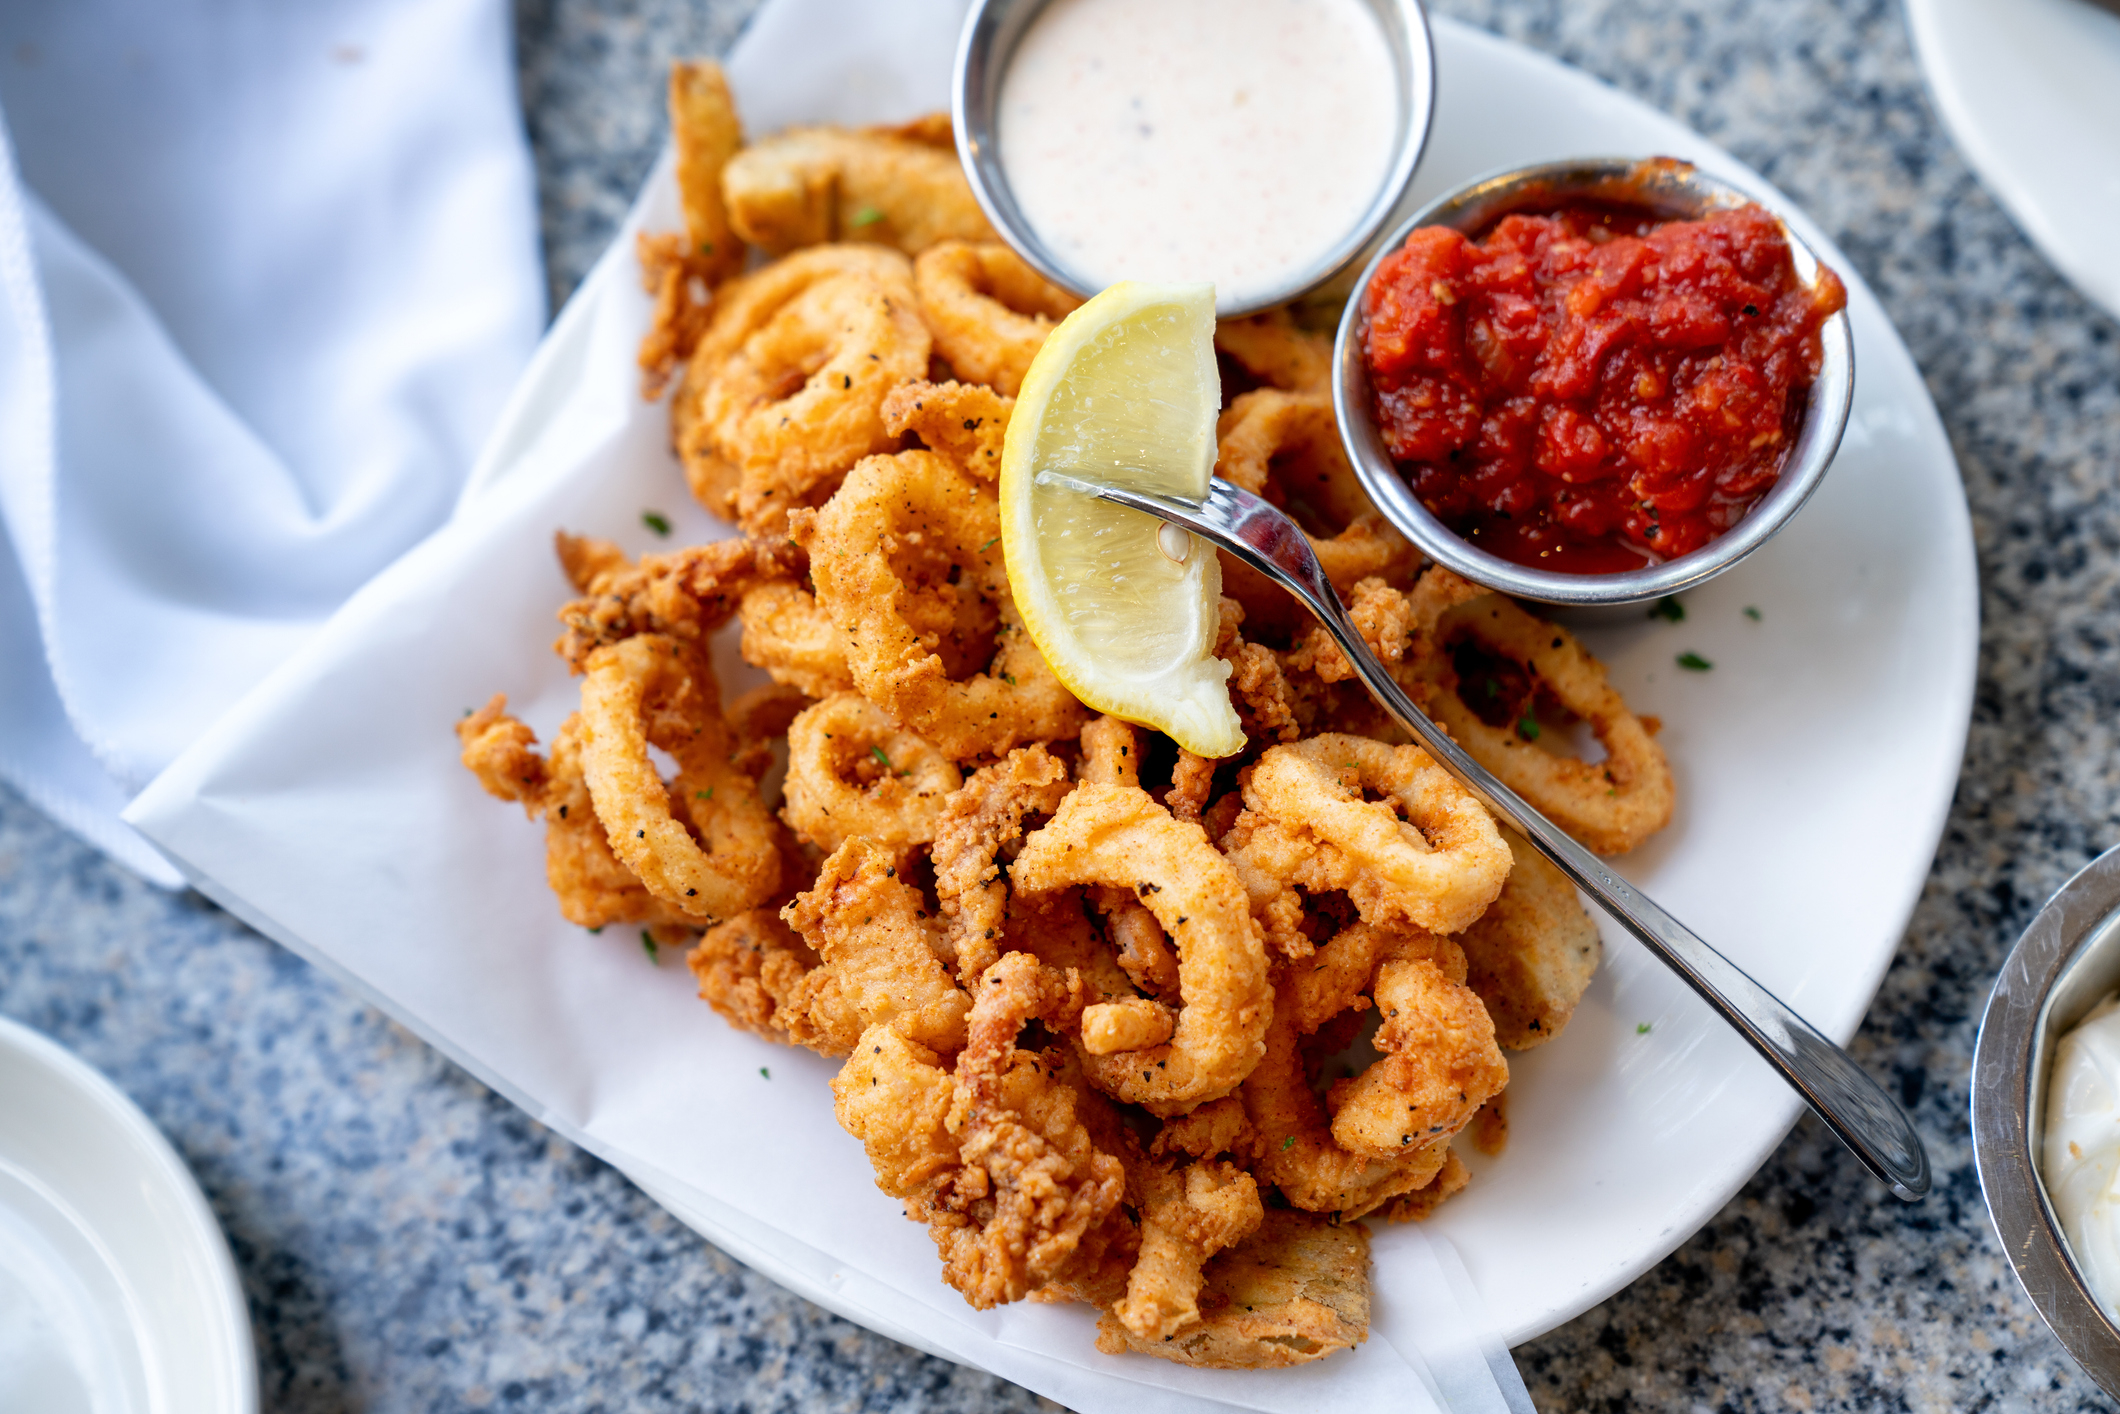 fried calamari on a plate with a lemon wedge and sauces